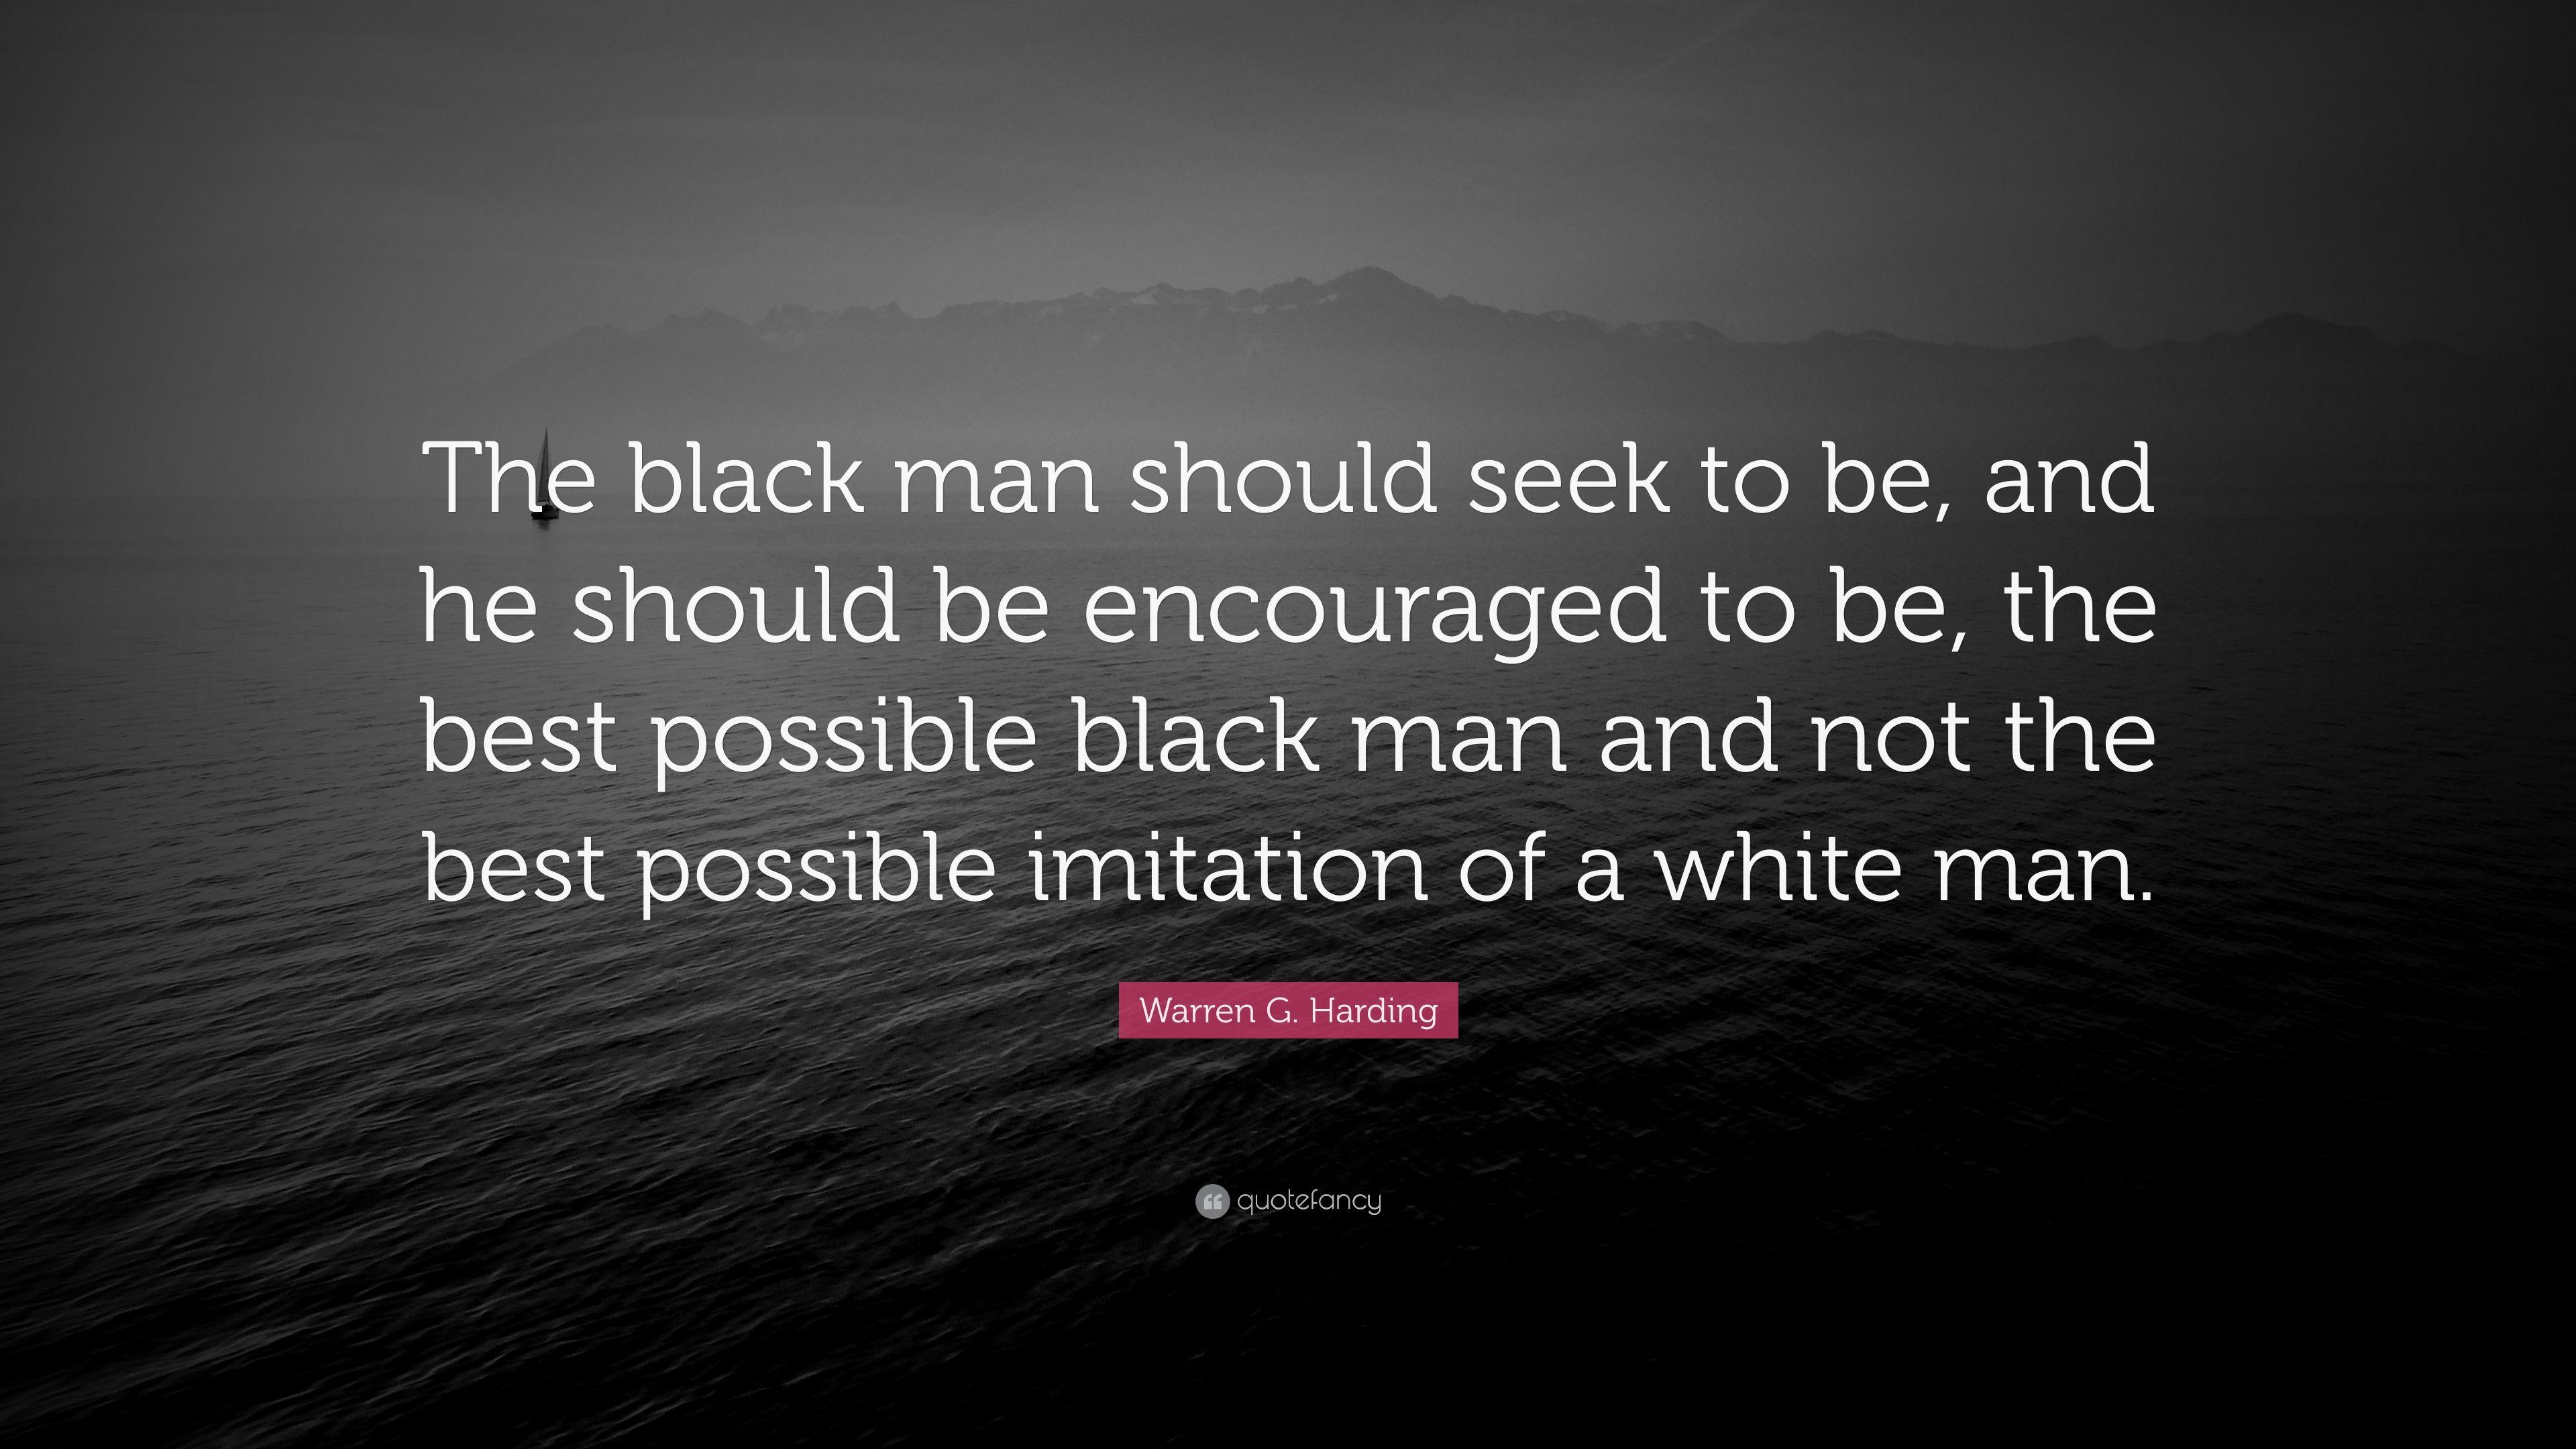 Warren G. Harding Quote: “The black man should seek to be, and he